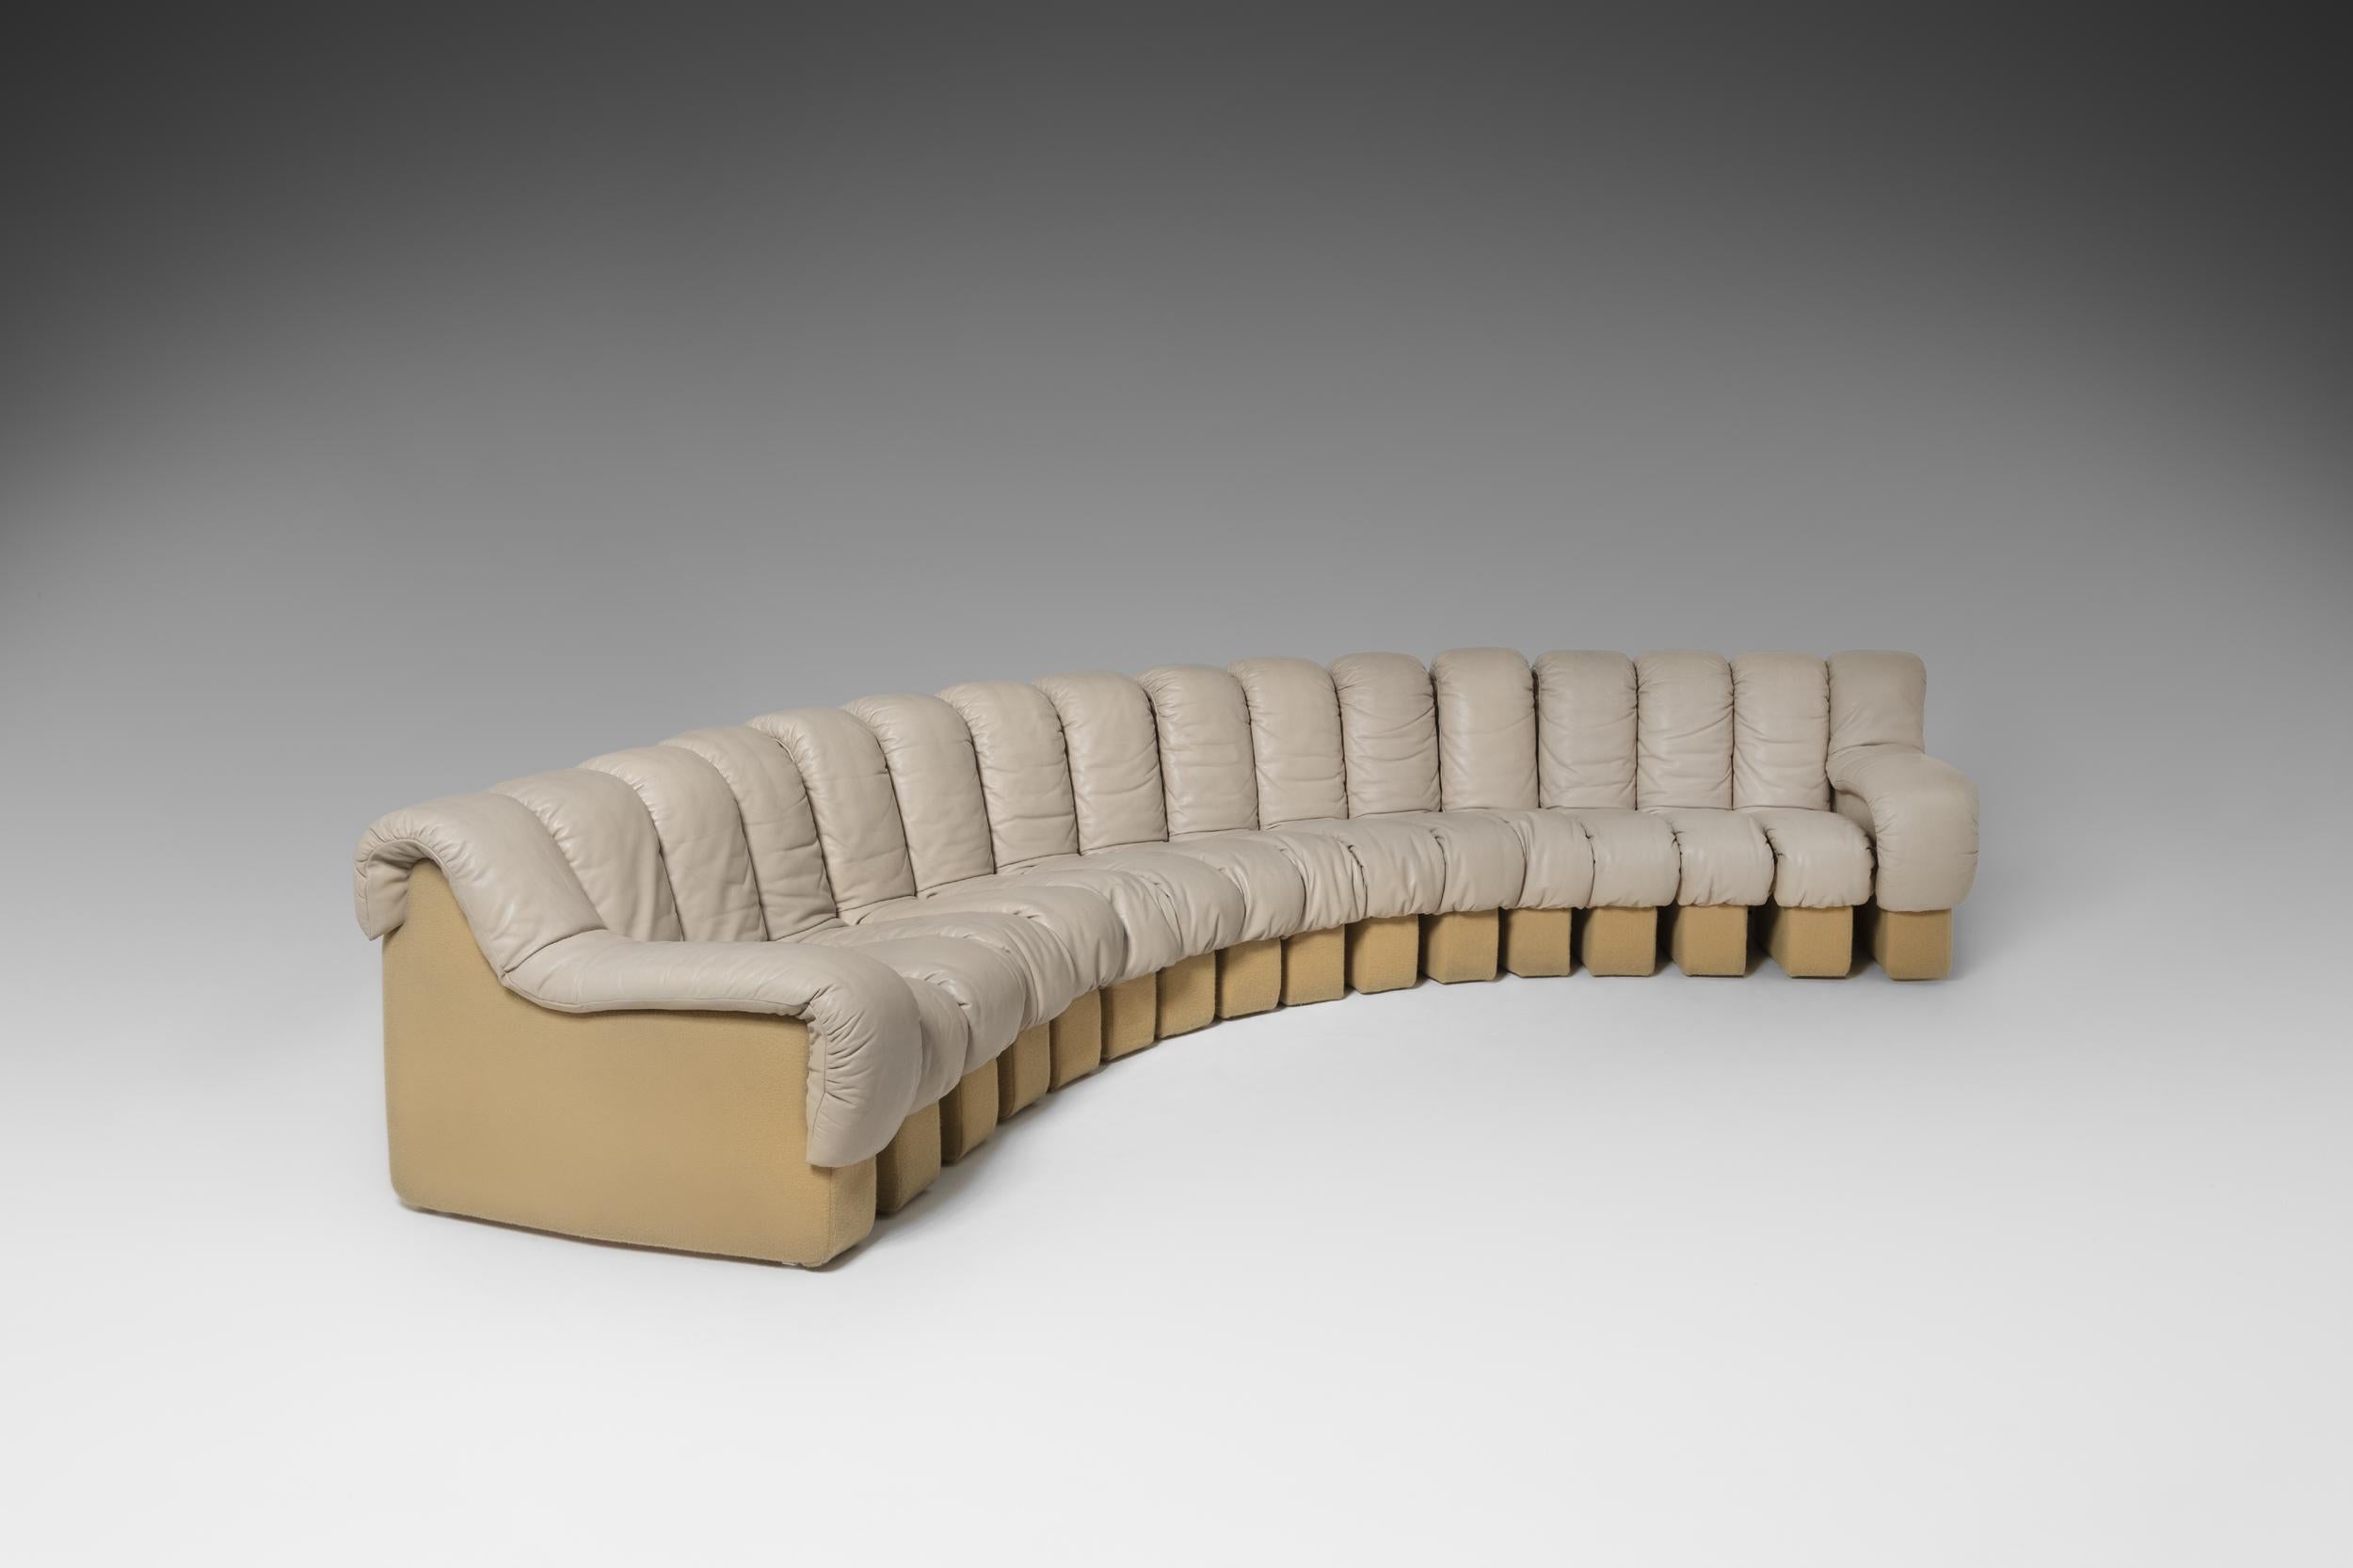 DS600 'Non Stop' sectional sofa by Ueli Bergere, Eleonora Peduzzi-Riva, Heinz Ulrich and Klaus Vogt for De Sede, Switzerland, 1972. The sofa contains 16 pieces with the original smooth beige / sand colored leather upholstery with a matching beige